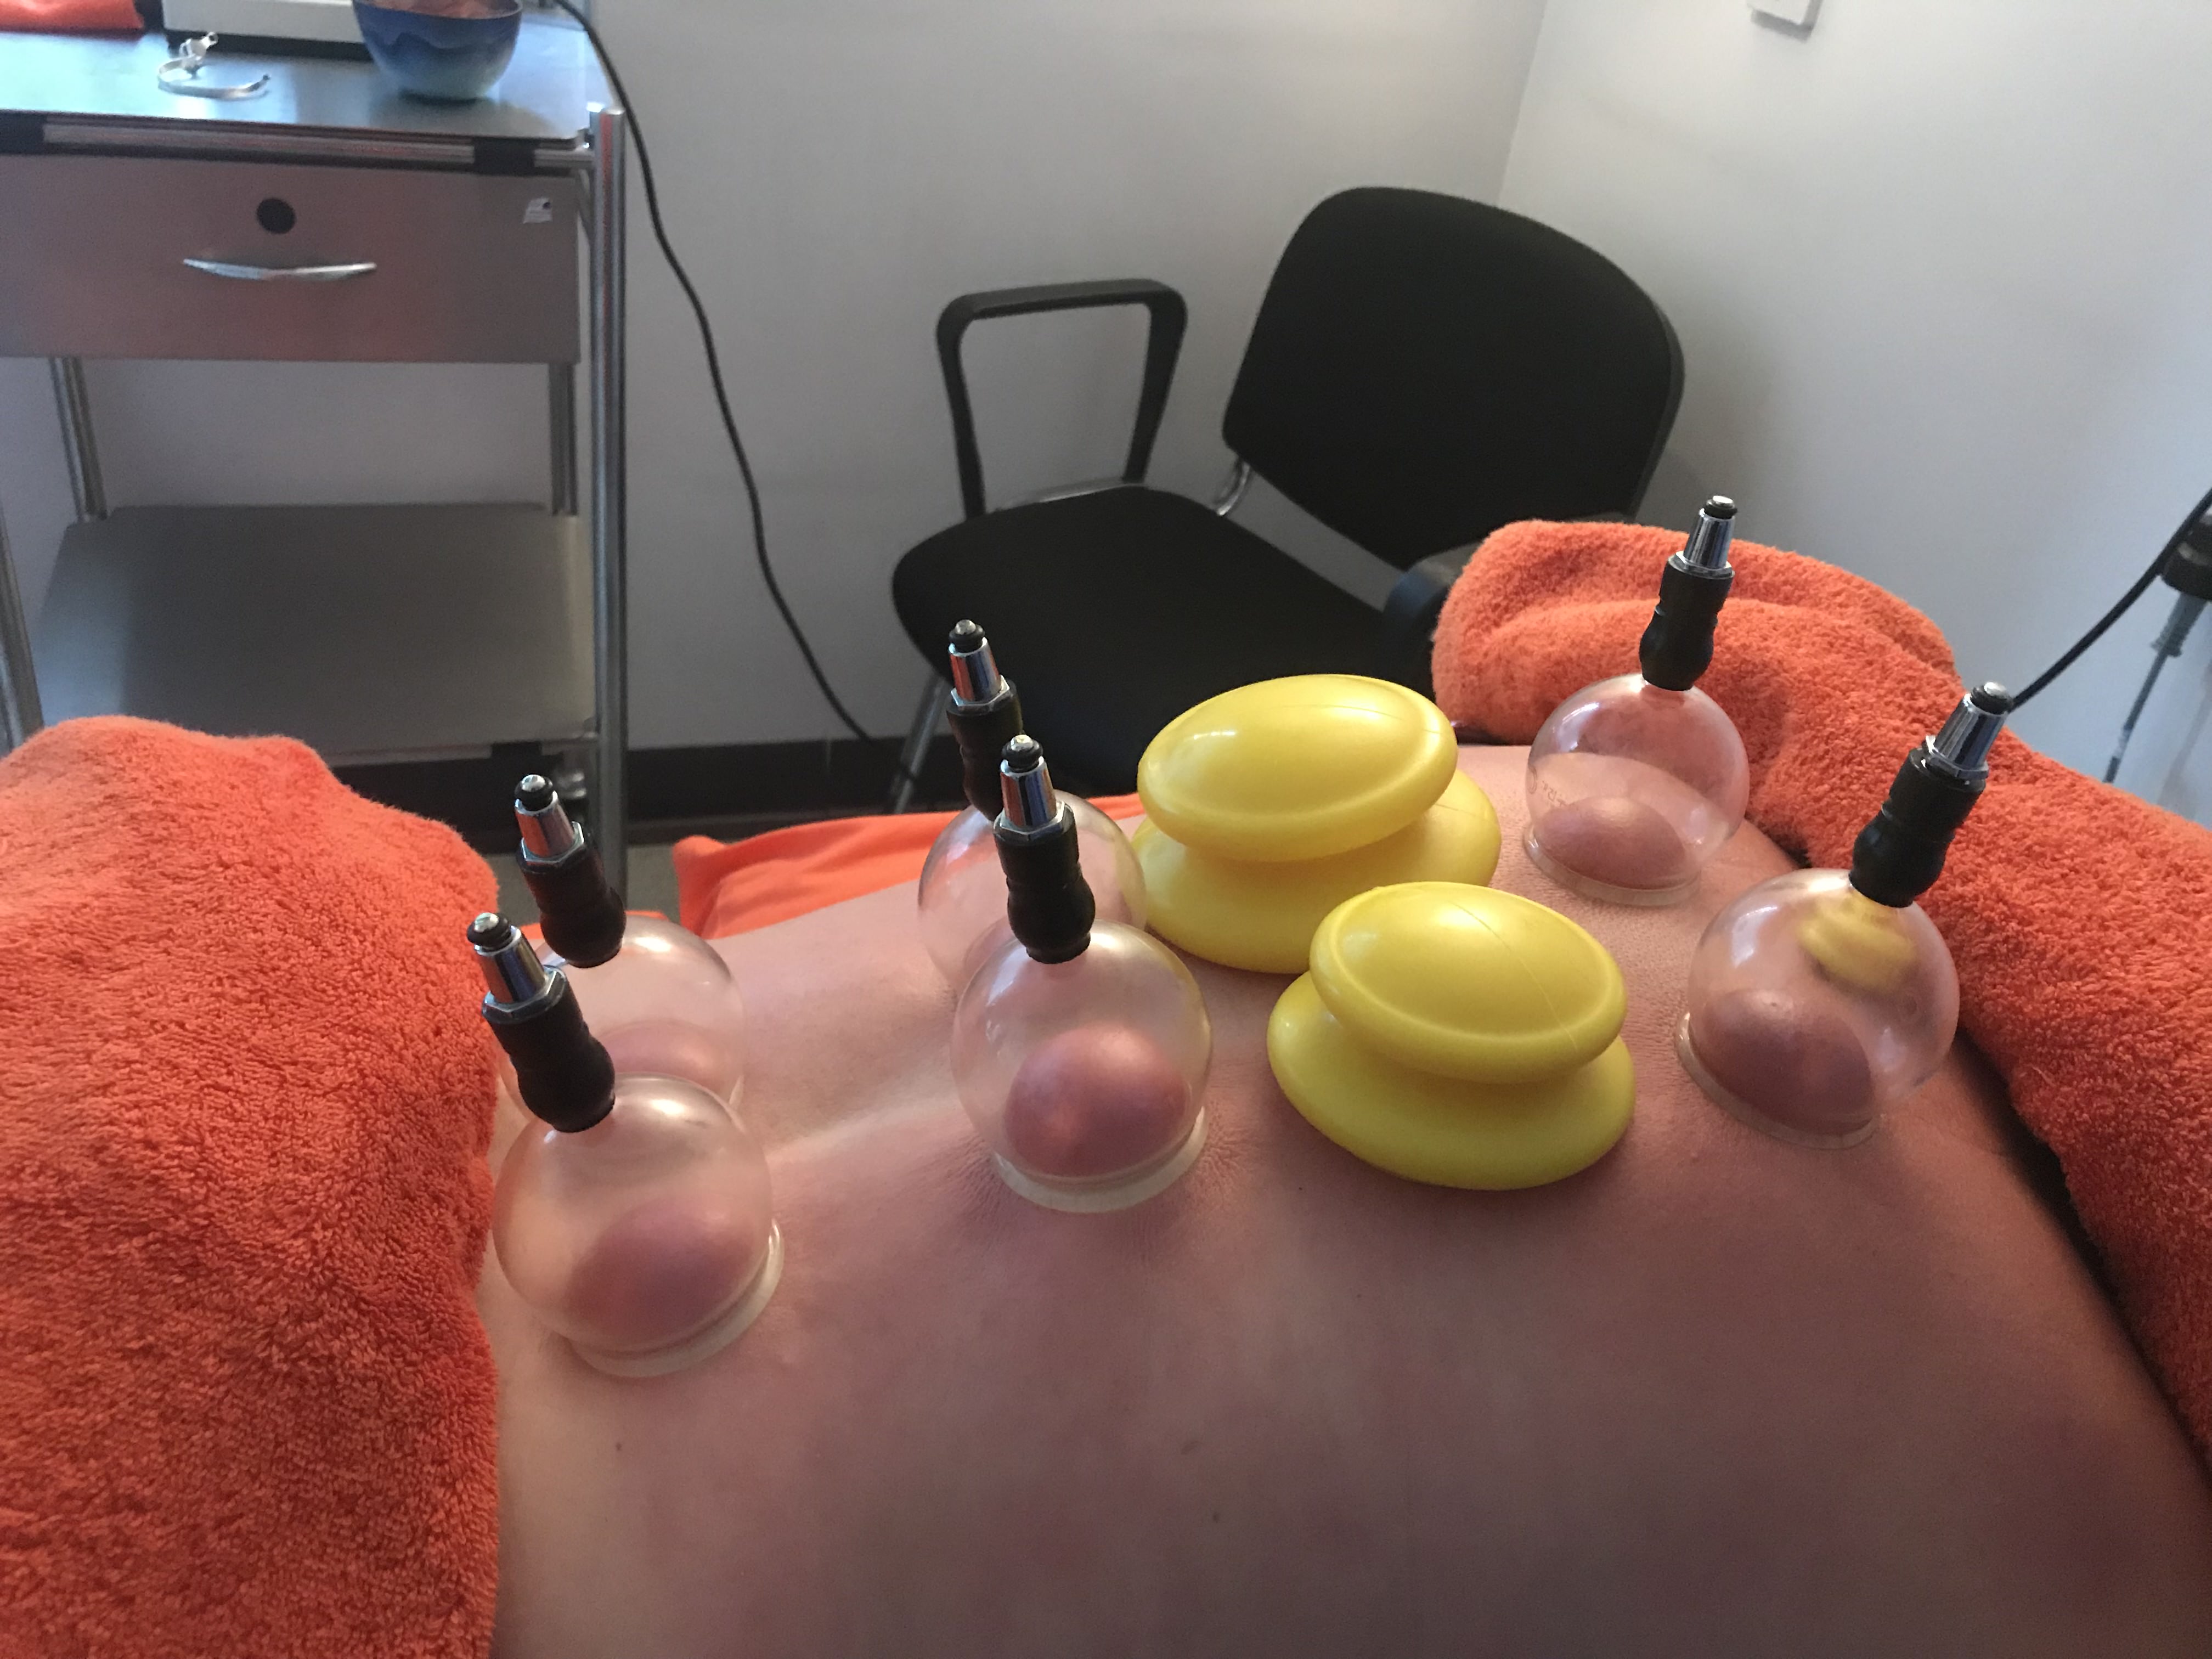 Cupping to nourish Qi and move stagnation